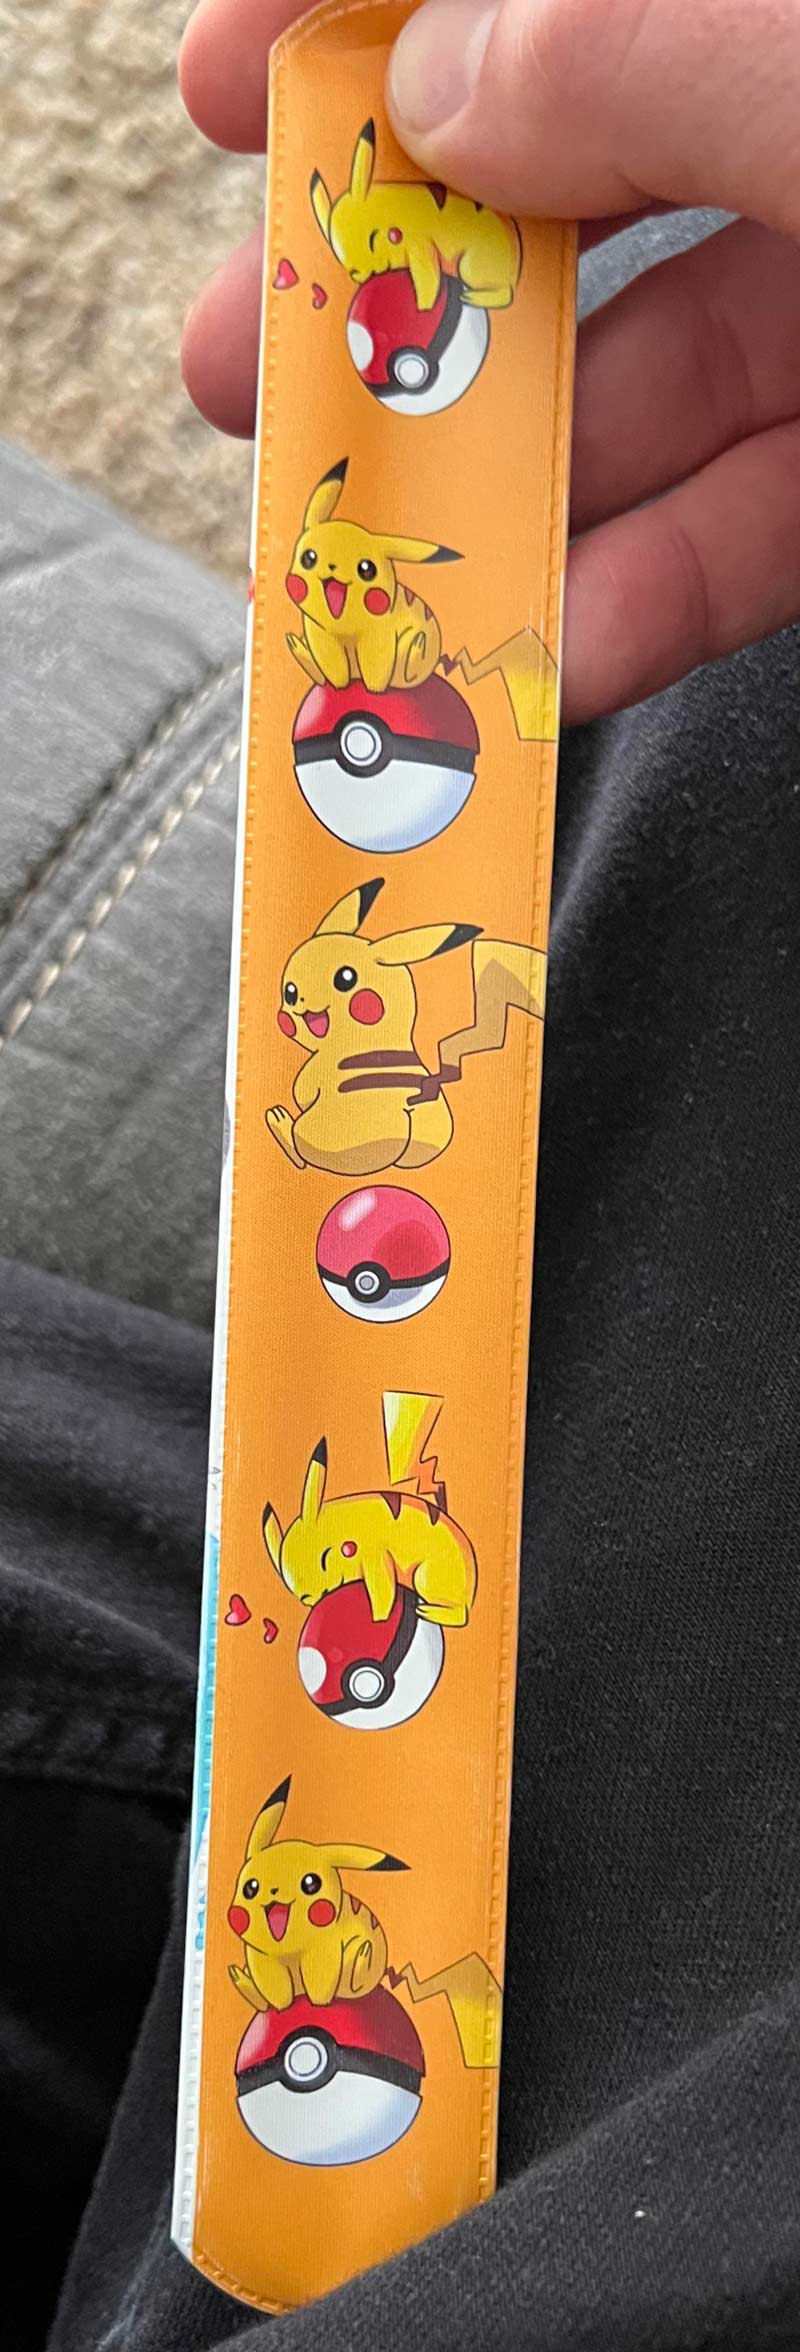 Party favors at a kindergarten birthday party featuring Thicc-achu